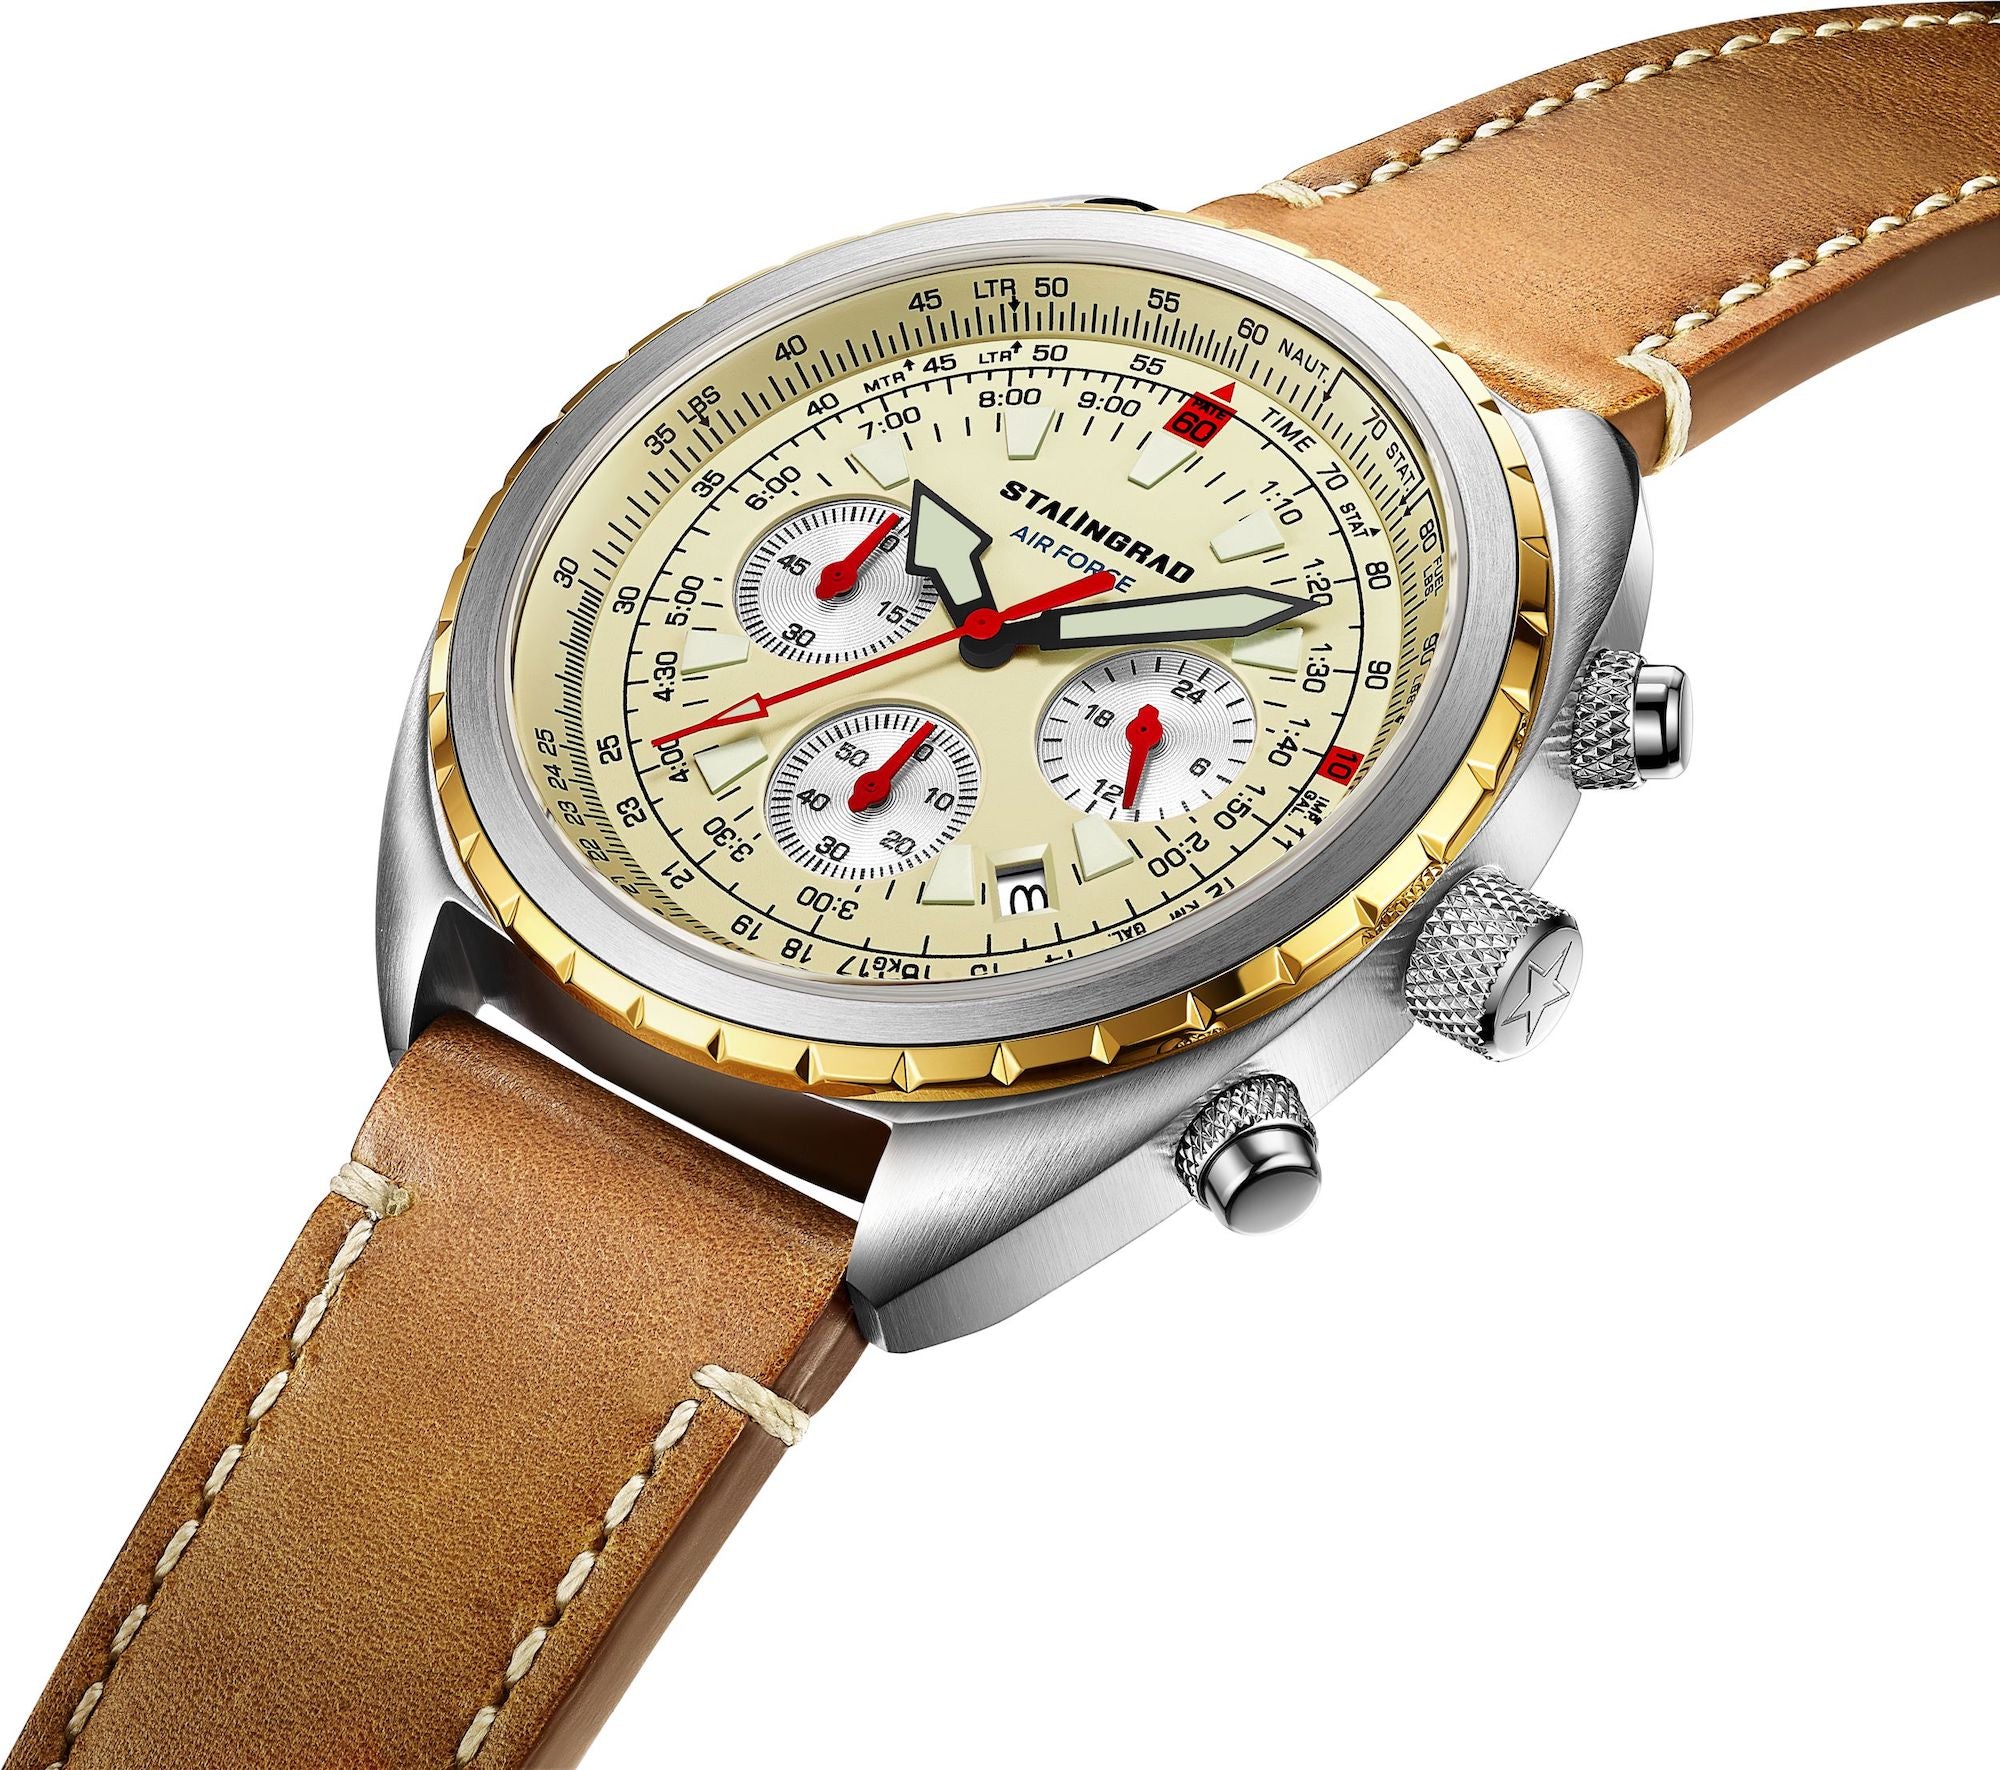 Stalingrad Novikov Chronograph Pilot Watch beige dial and brown leather strap on a white background diagonal side view